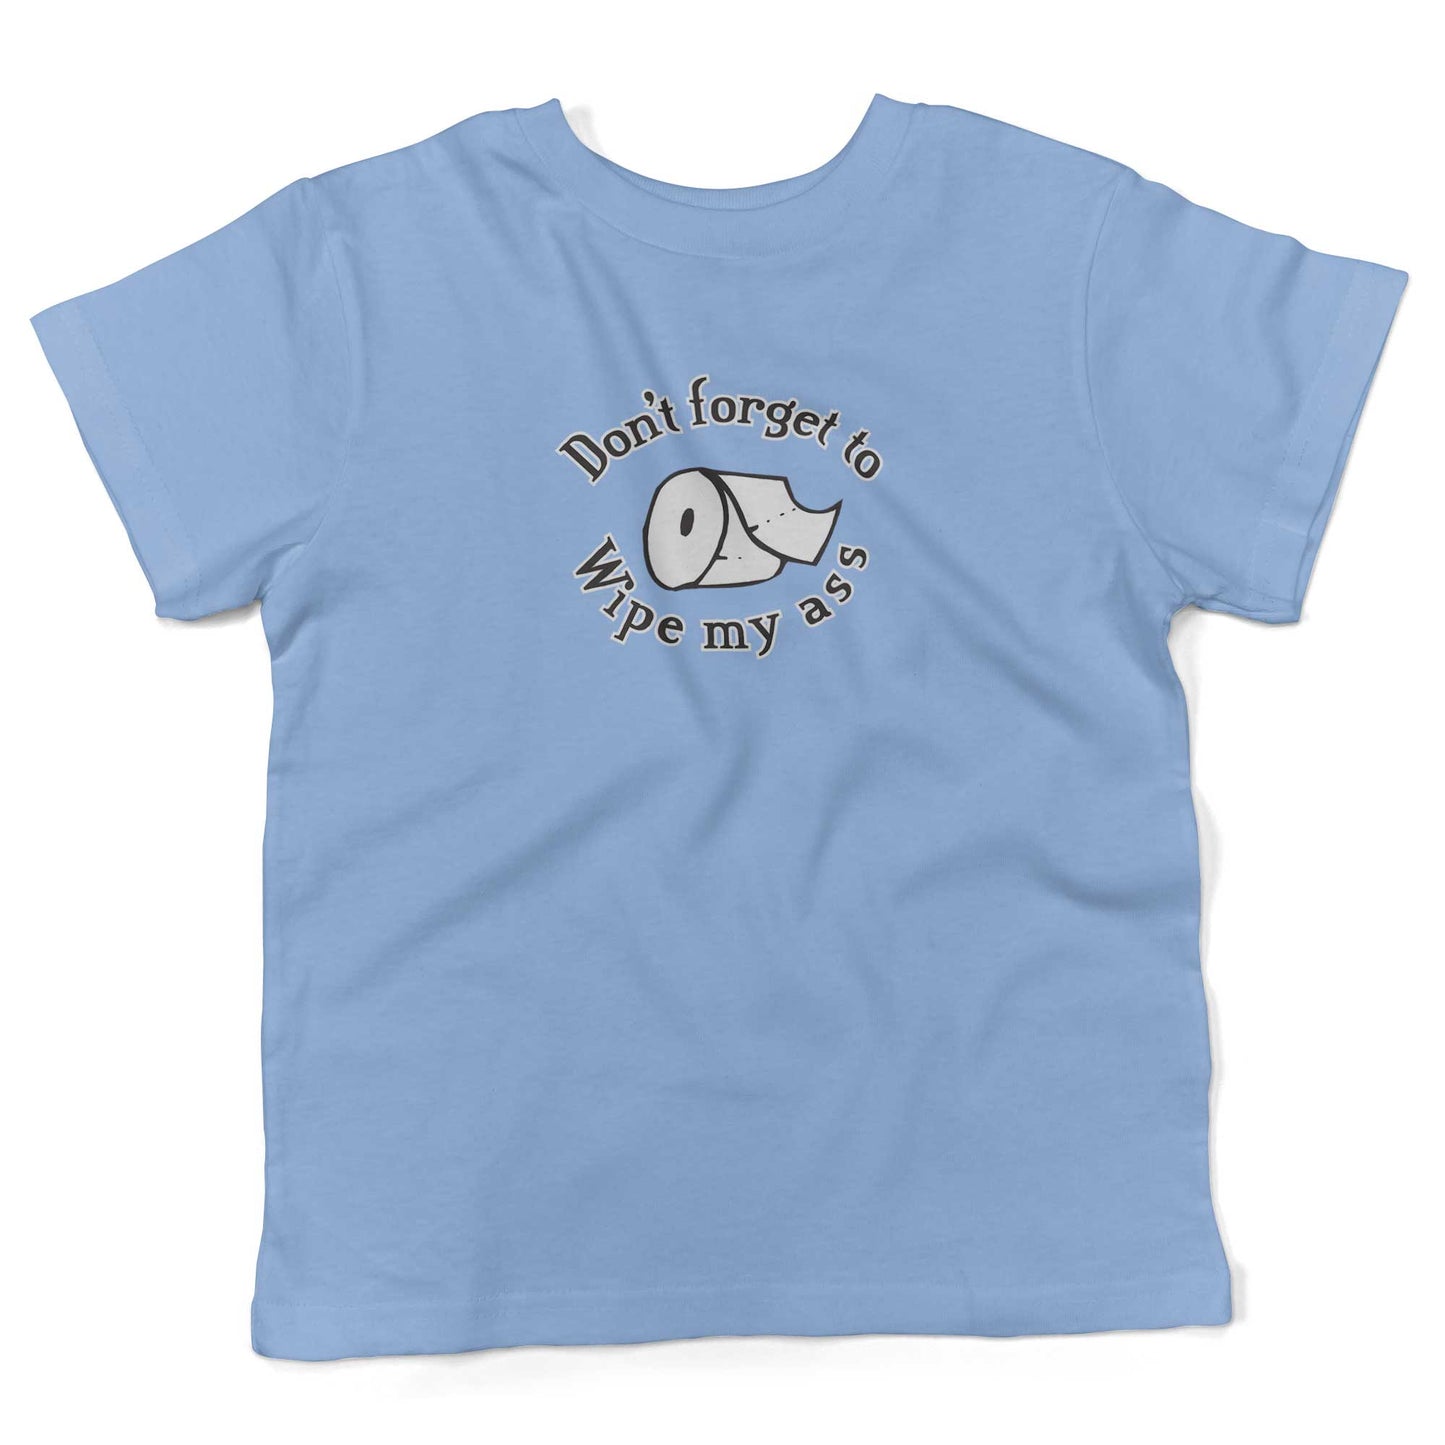 Don't Forget To Wipe My Ass Toddler Shirt-Organic Baby Blue-2T